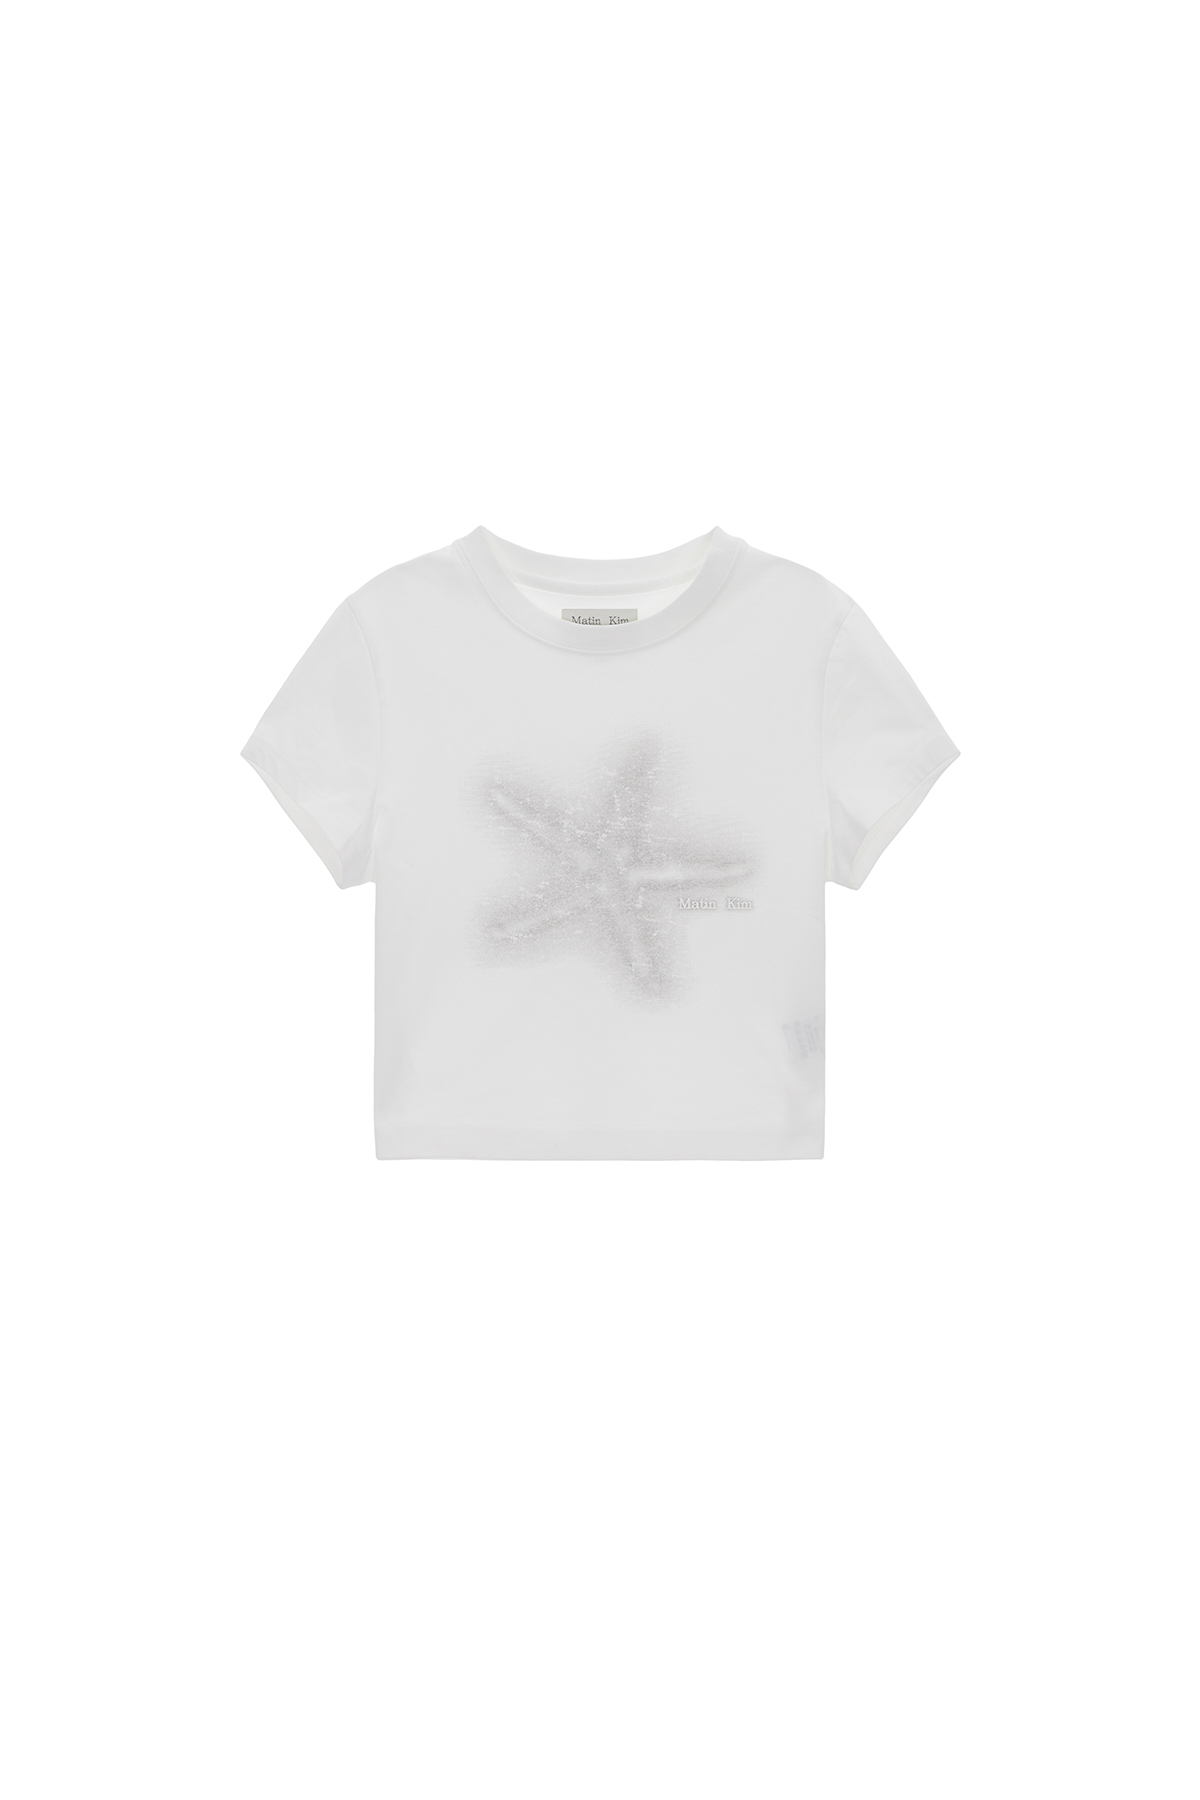 STARFISH GRAPHIC CROP TOP IN WHITE